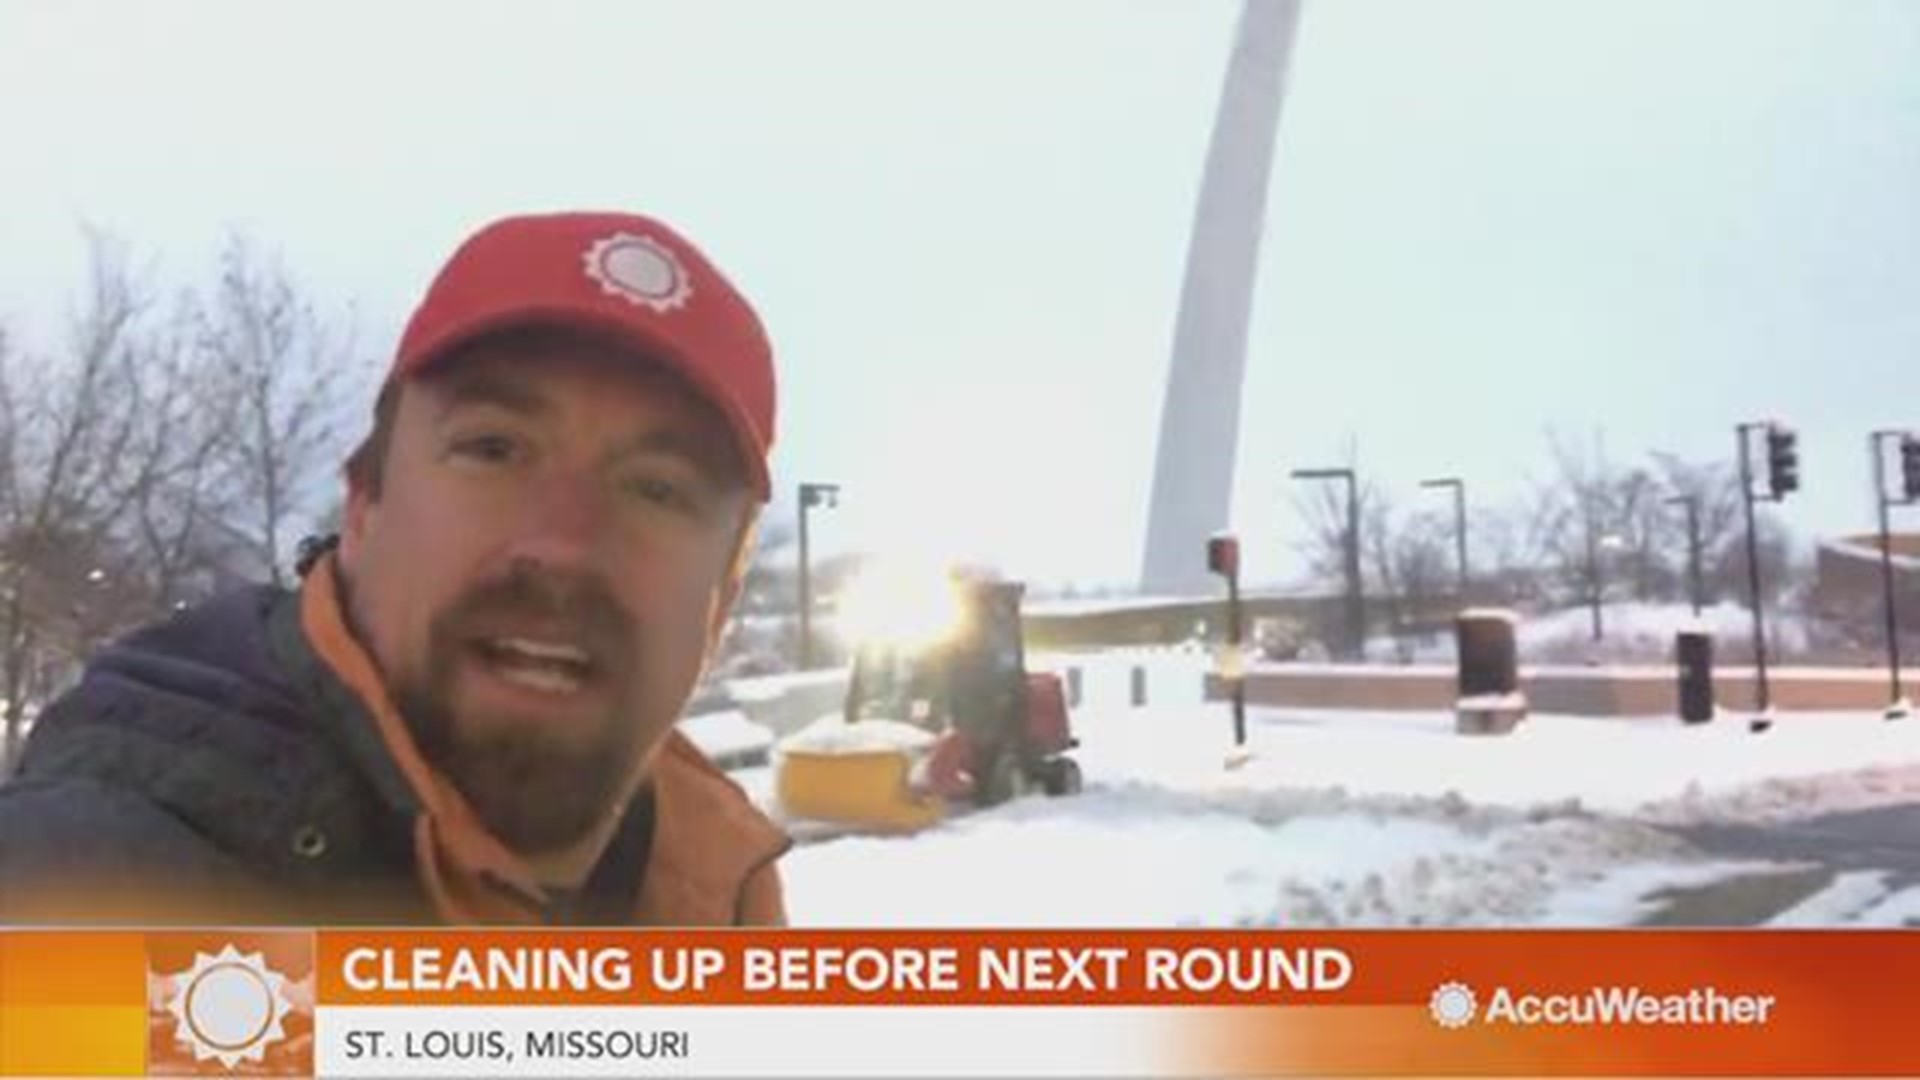 Storm chaser Reed Timmer reports that city workers in St. Louis, Missouri are in a racing against time to clear the roads and streets before the next round of snow from the winter snow comes.